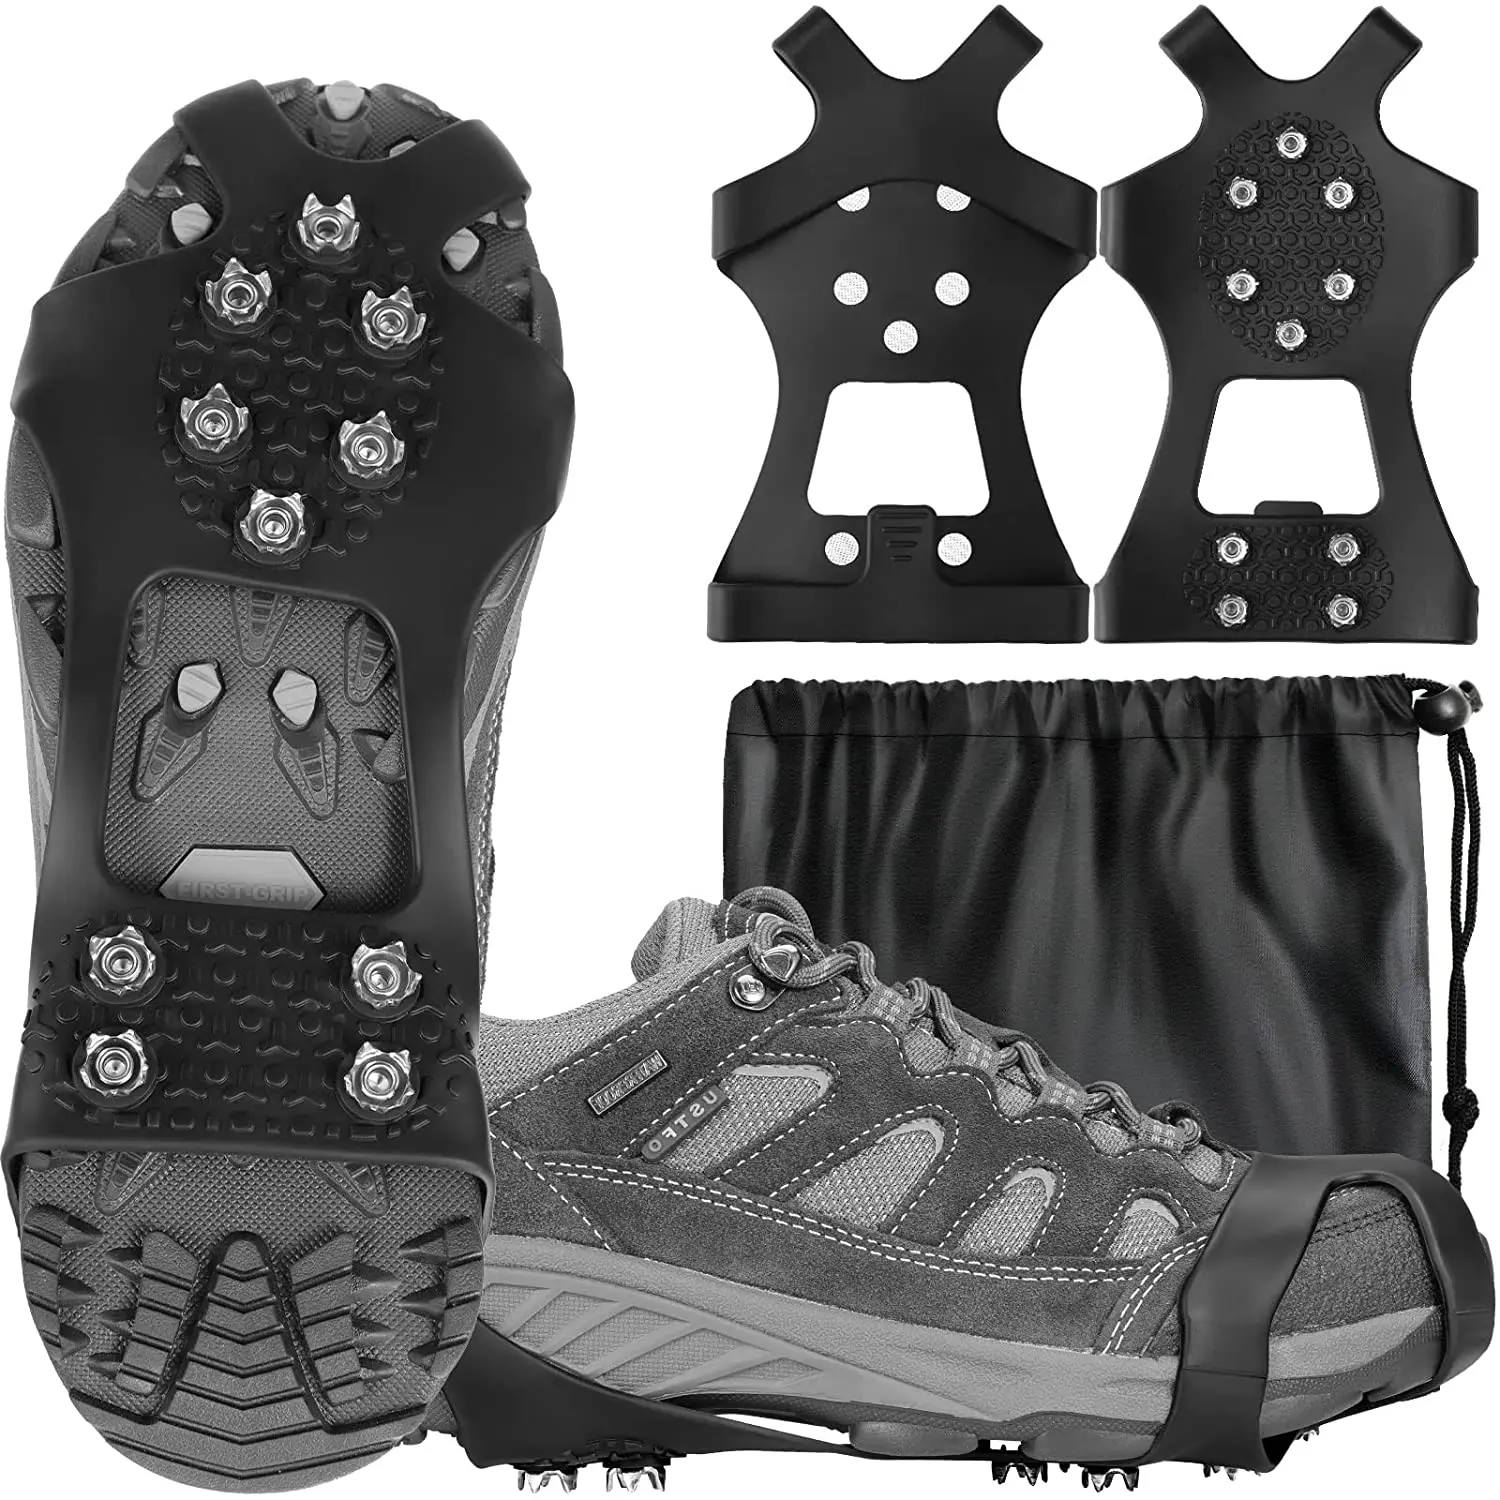 

Ice Non Slip Snow Shoe Spikes Grips Cleats Crampons Winter Climbing Safety Tool Anti Slip Shoes Cover outdoor crampones